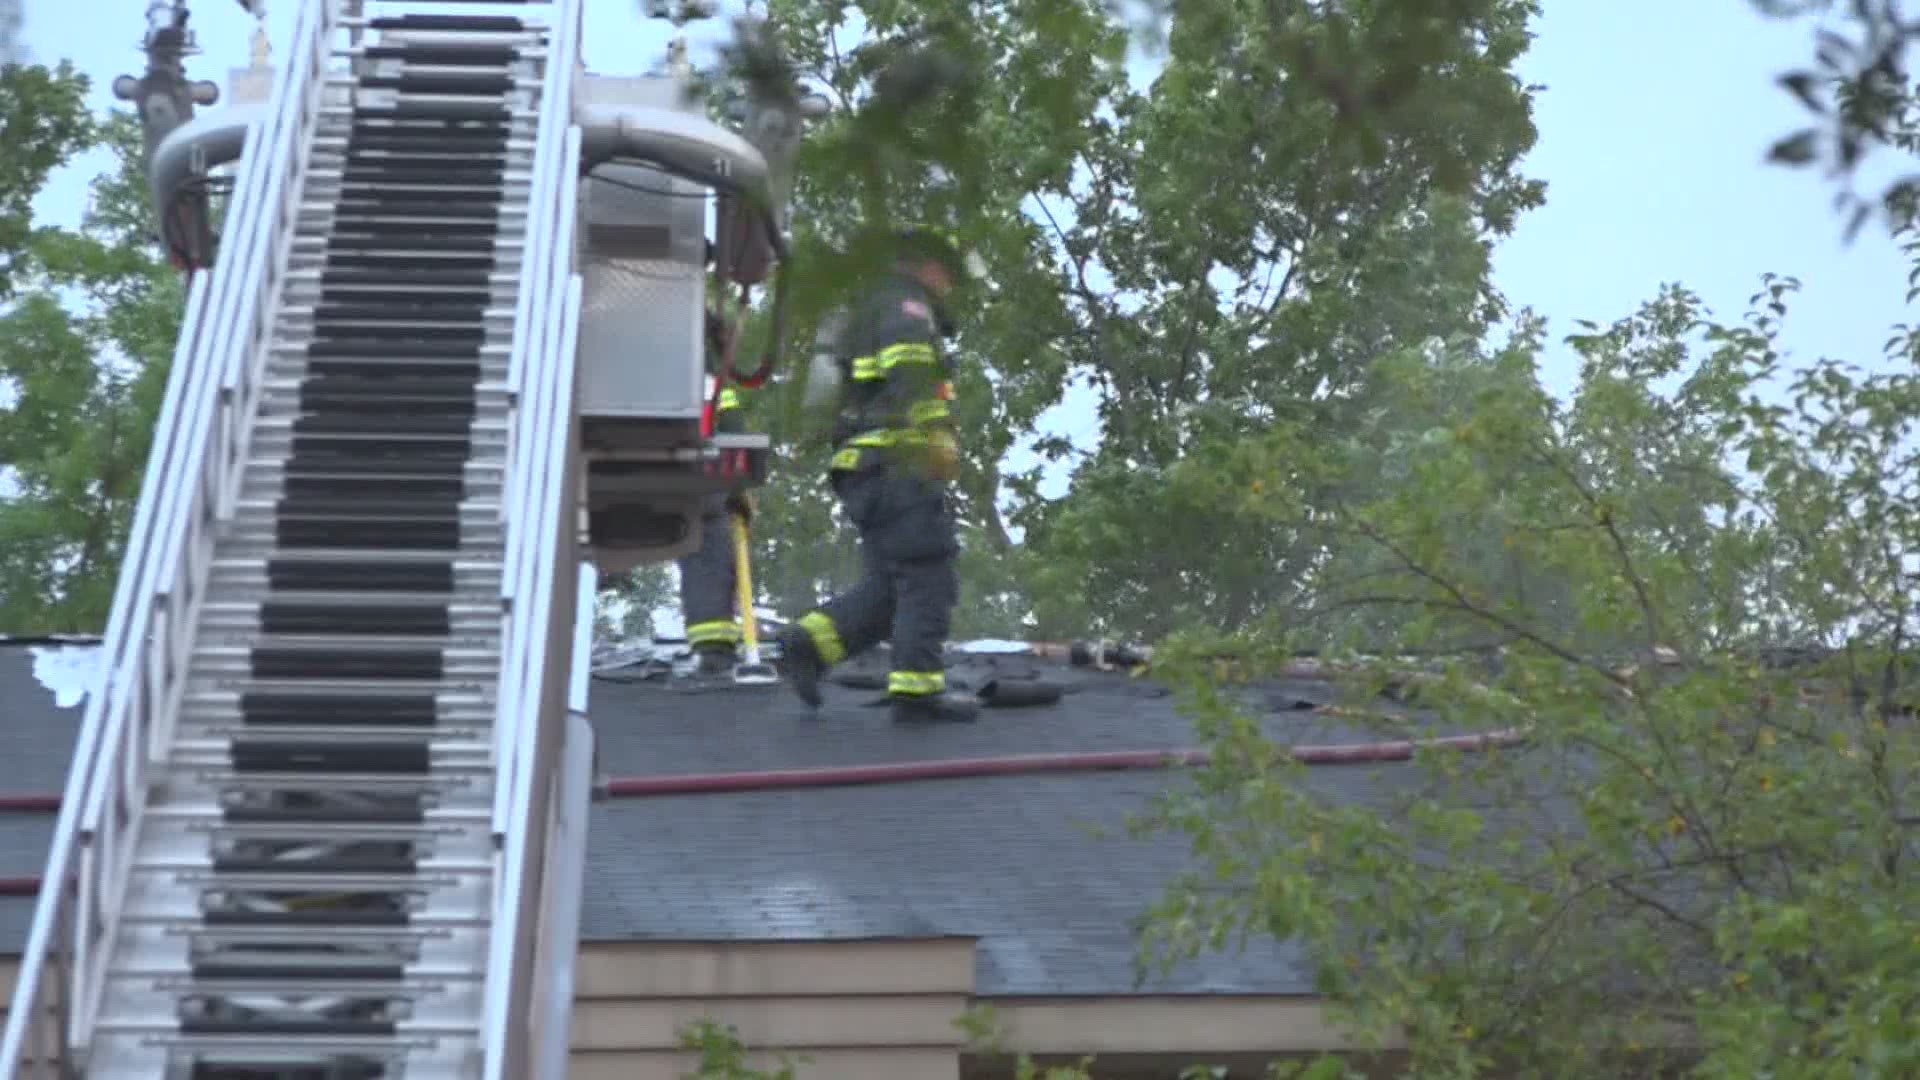 Significant damage could be seen on the roof of the building.